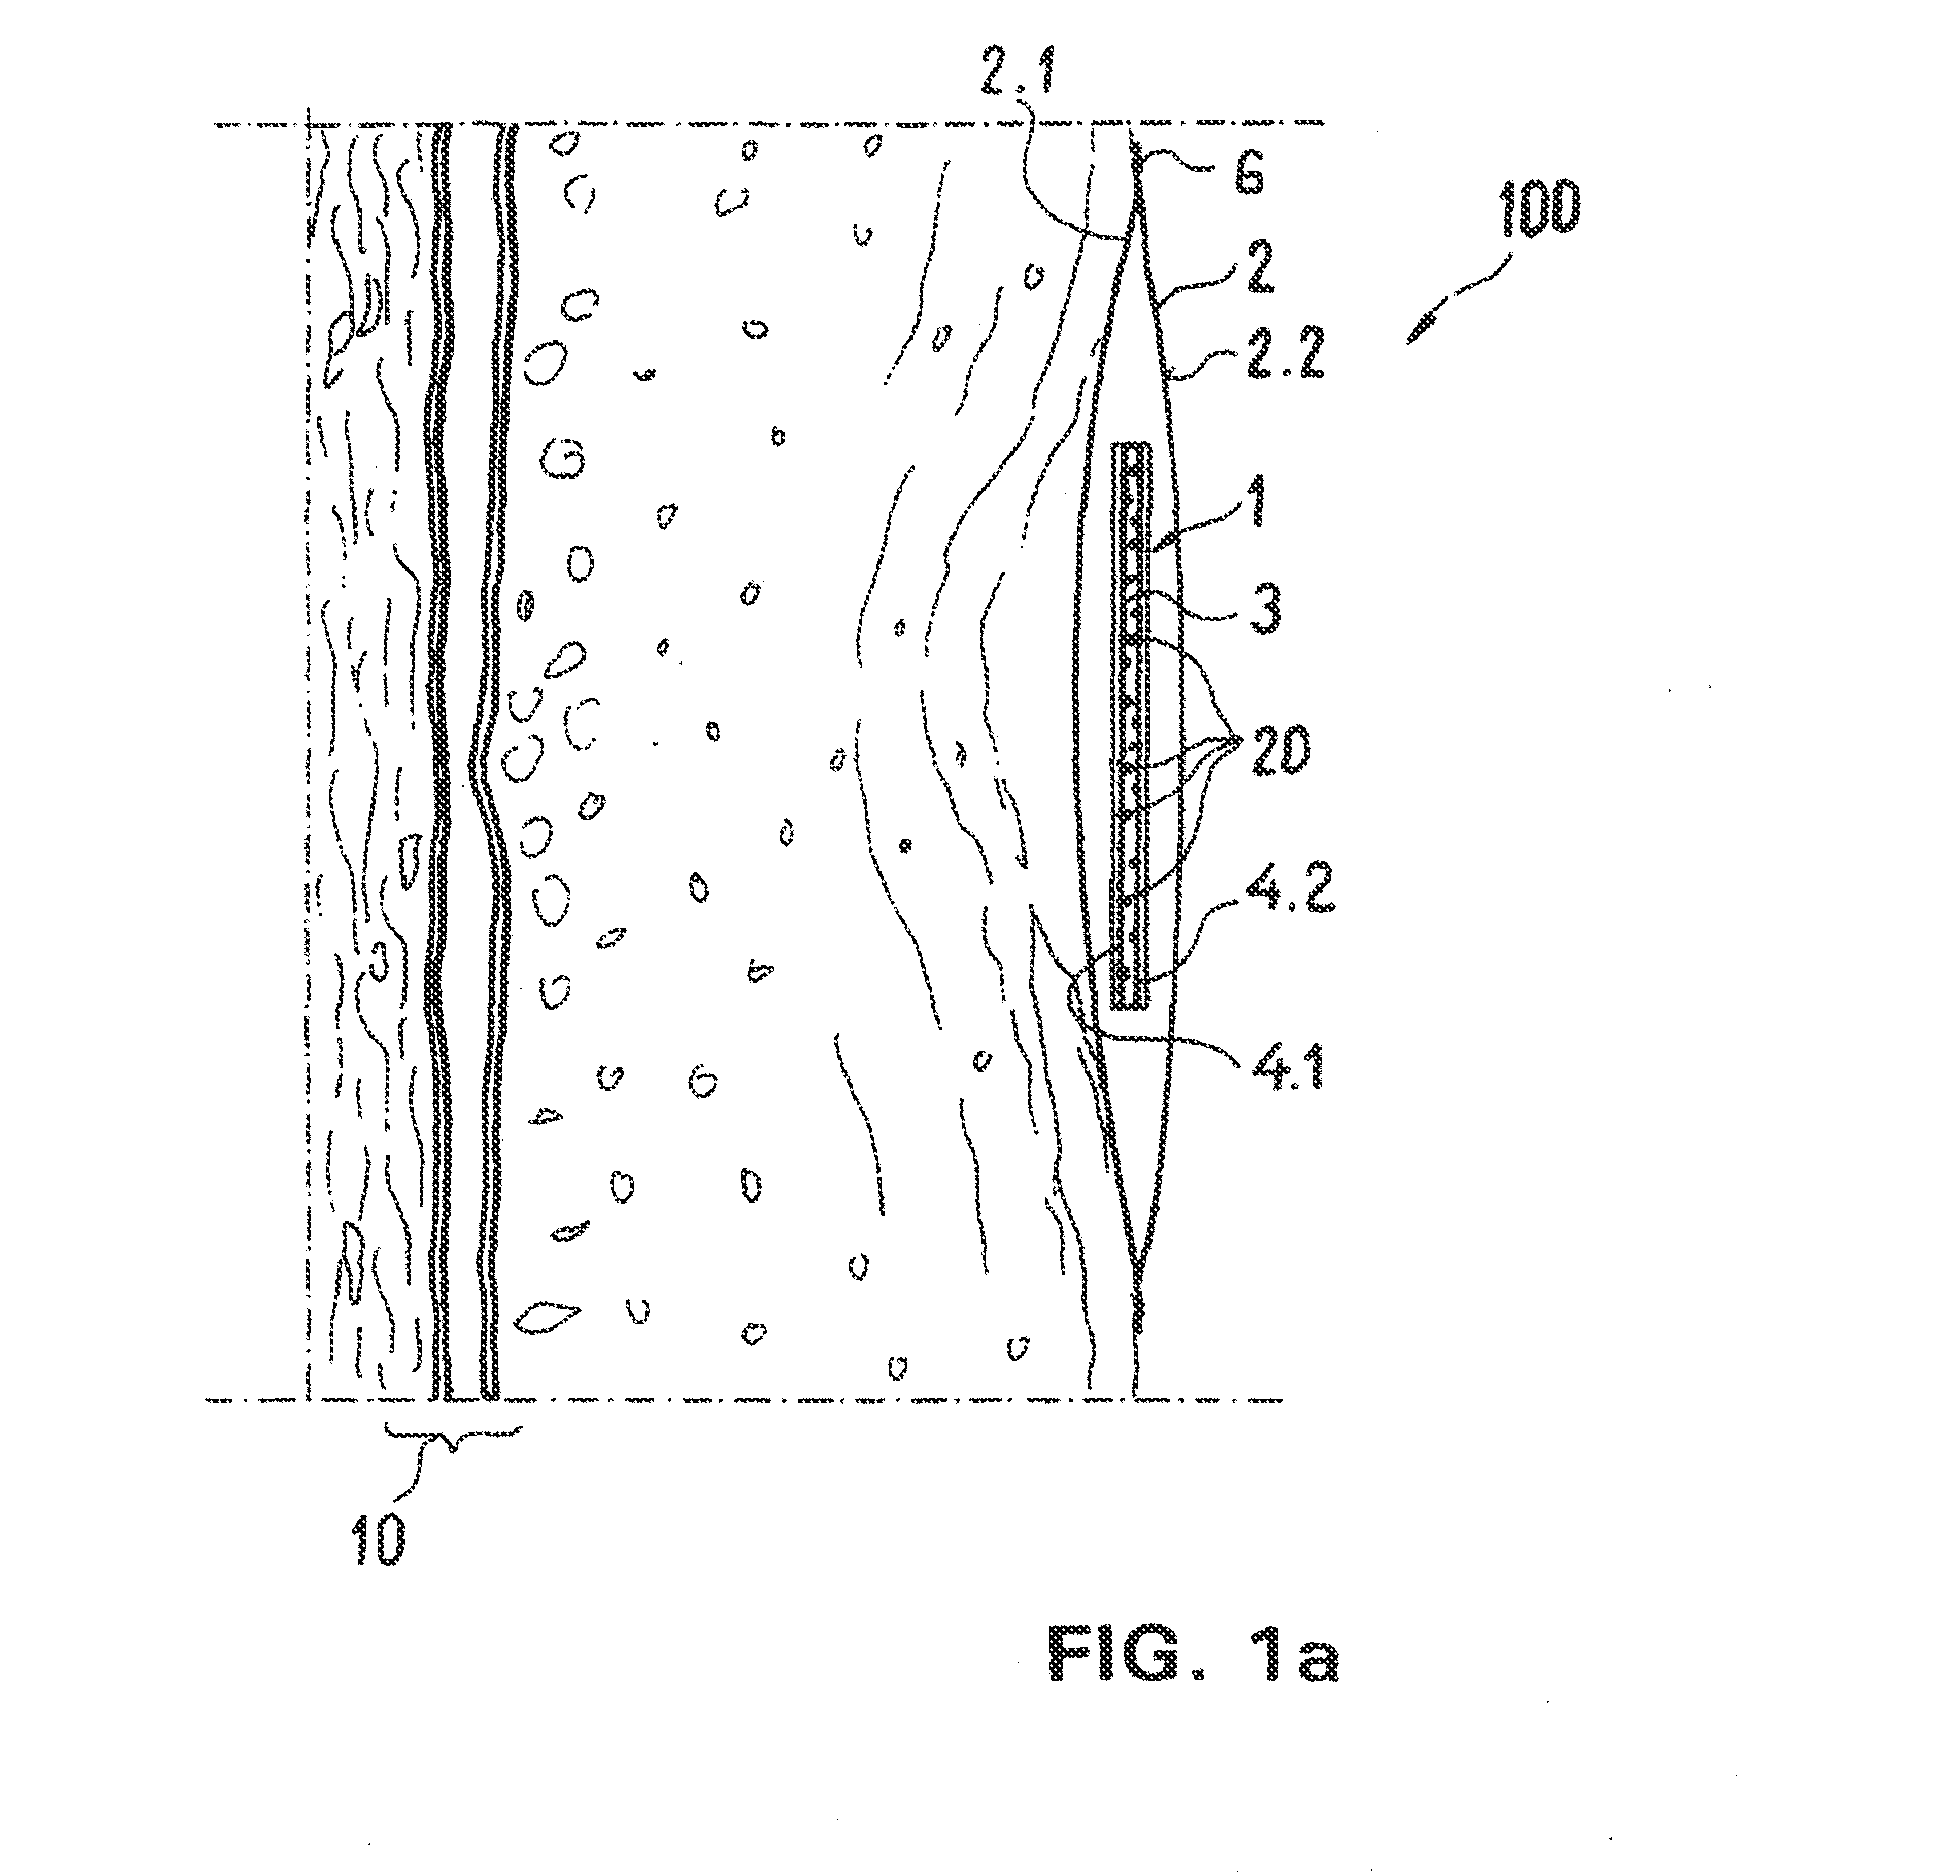 Absorbent article for application to human or animal skin surfaces